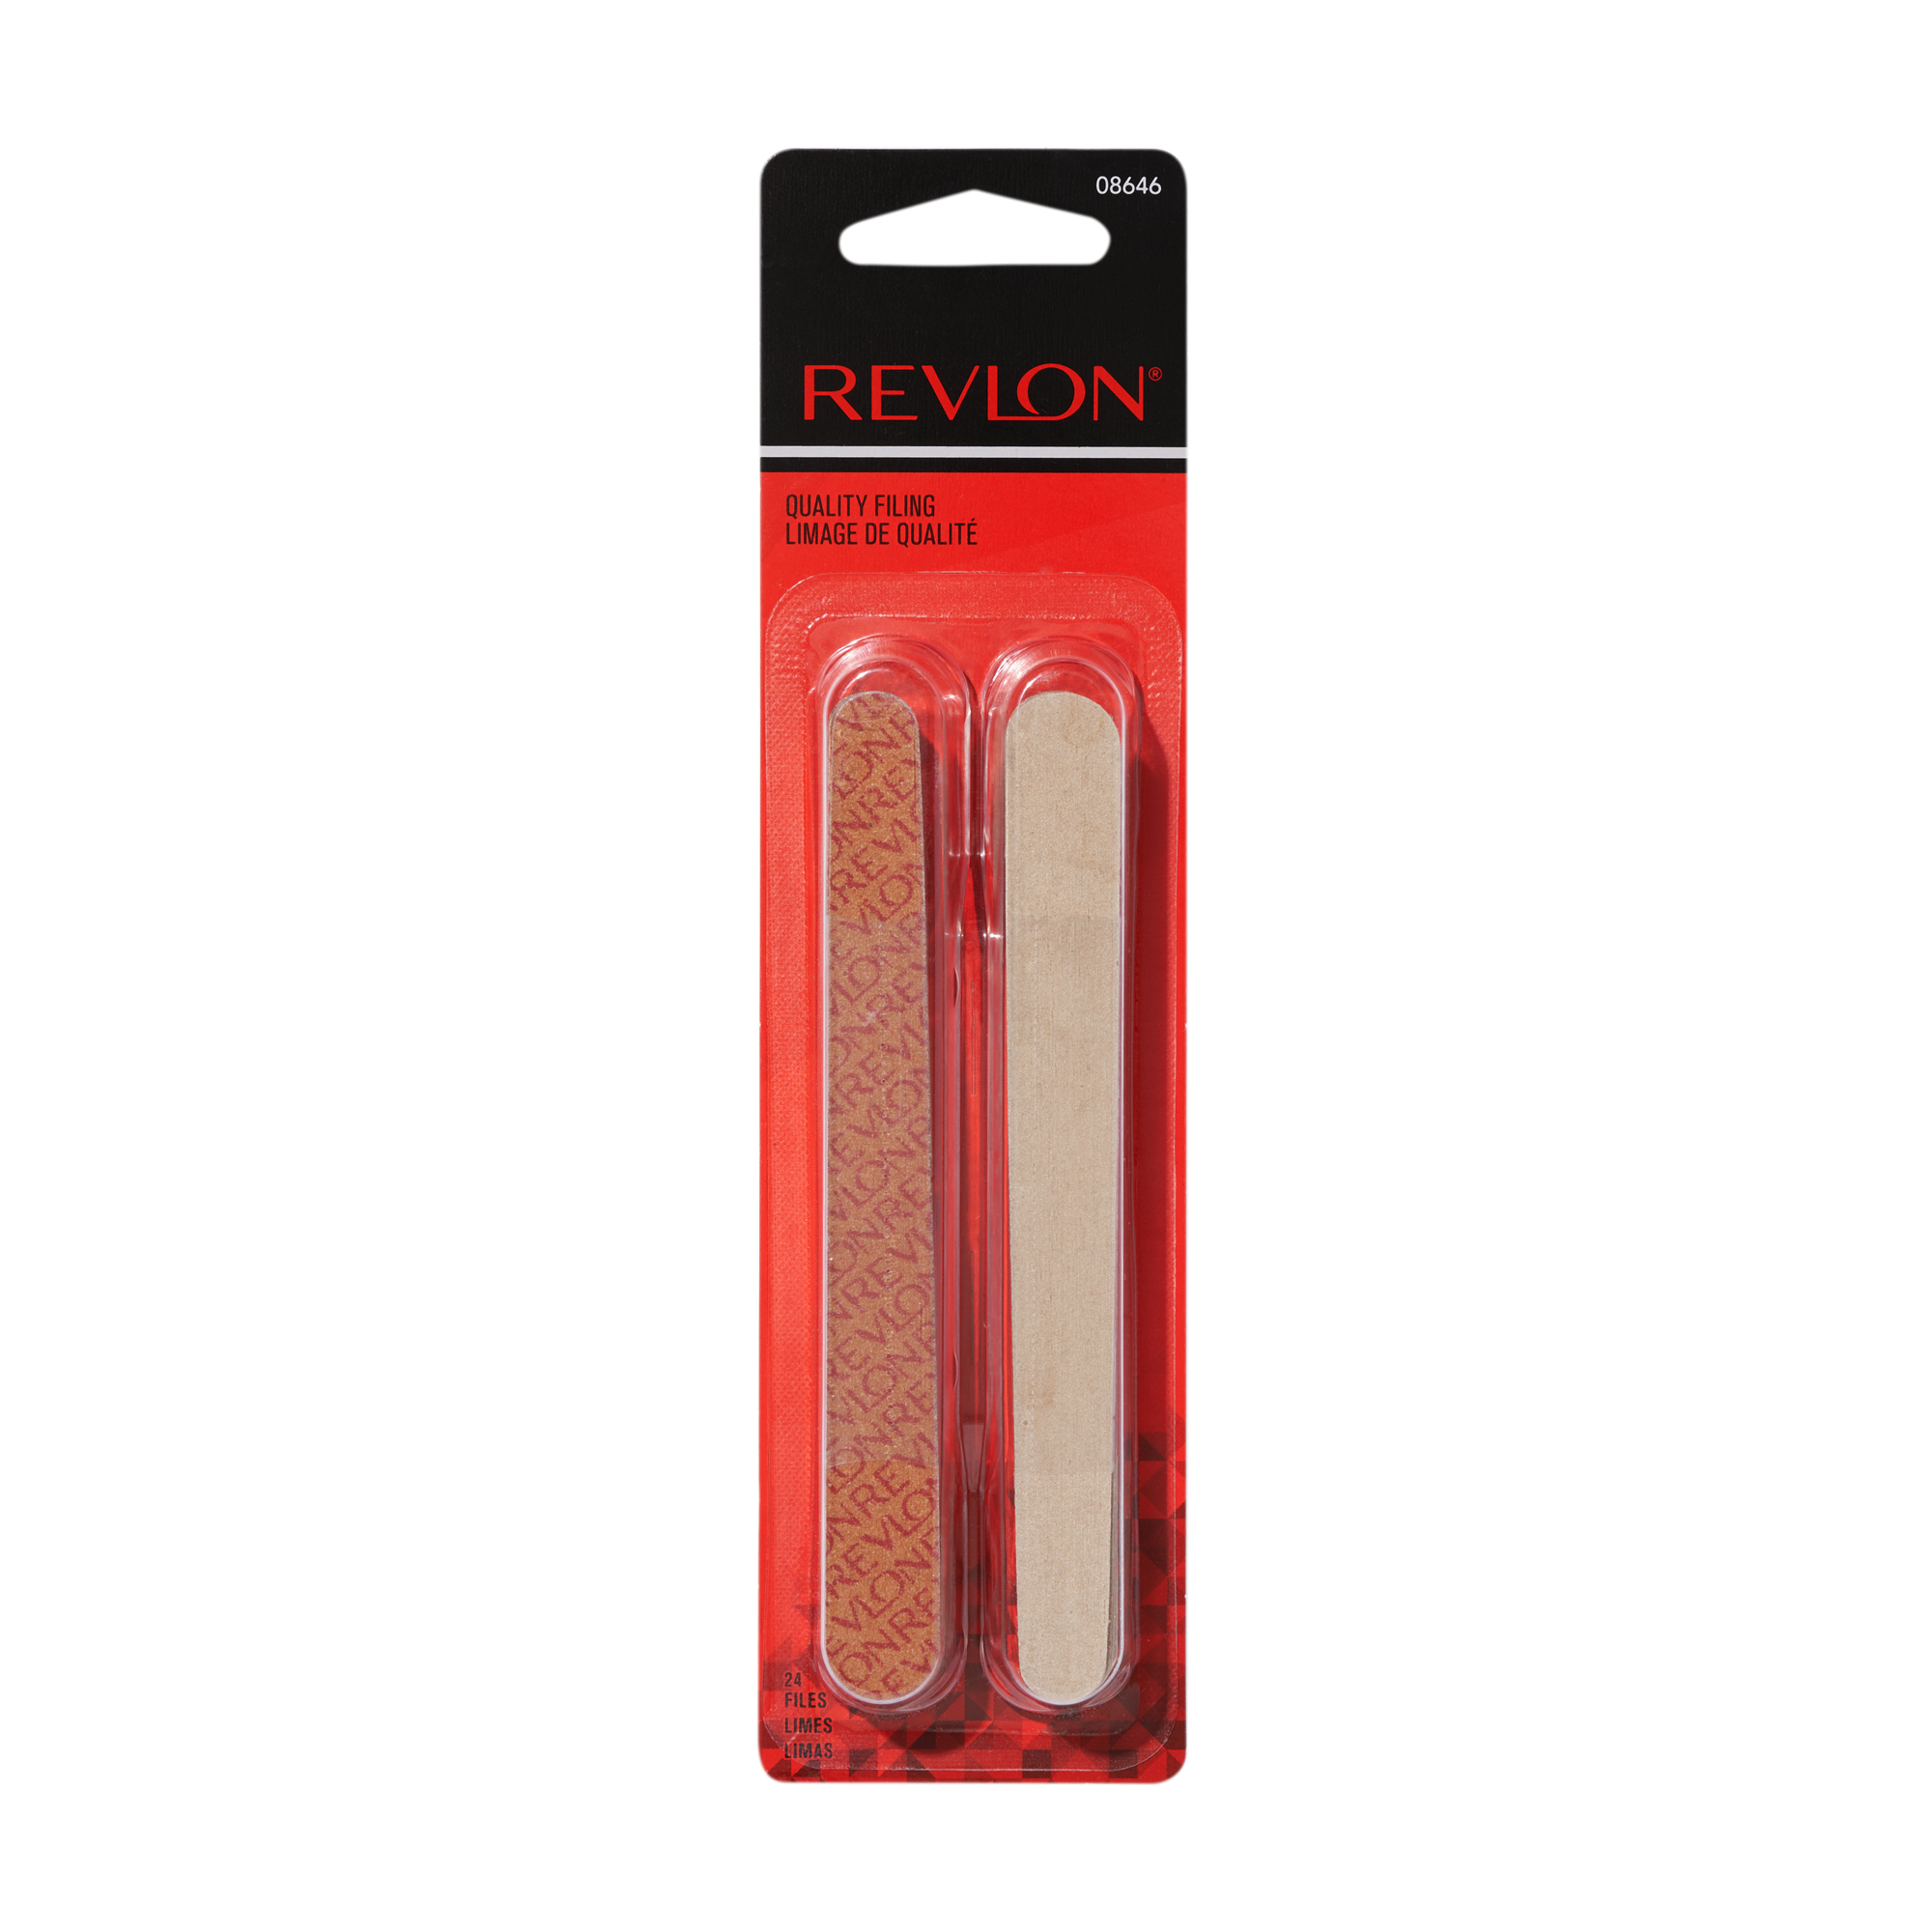 Revlon Compact Emery Boards, Dual Sided Nail File For Precise Nail Shaping And Smoothing, 24 count - image 5 of 5